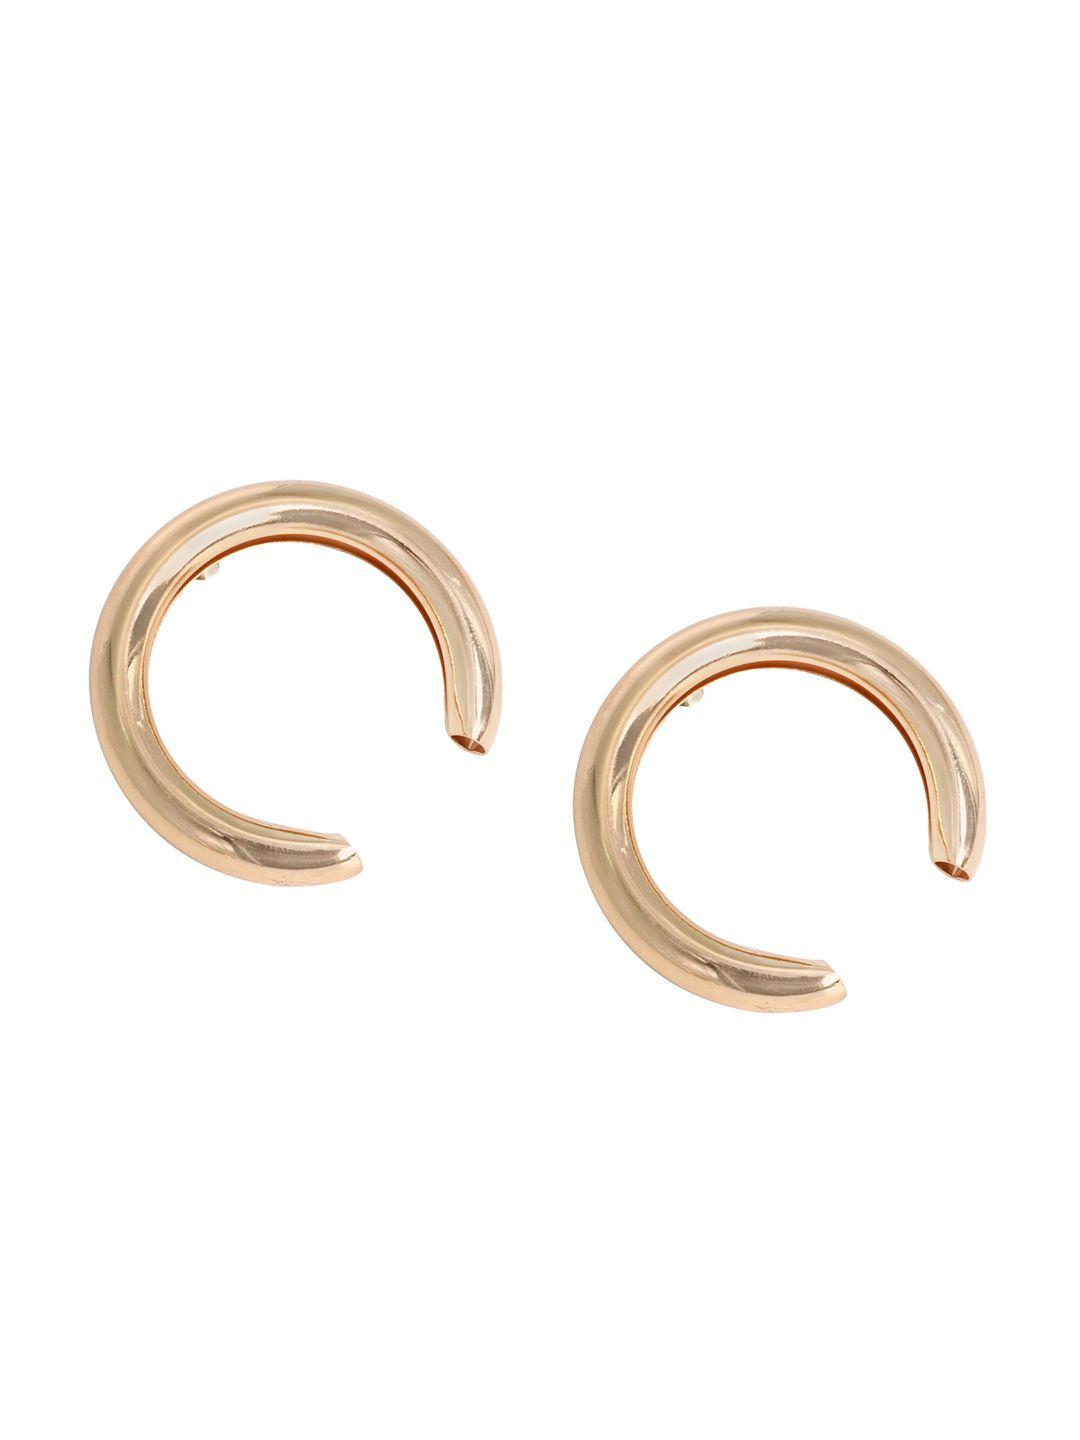 joker & witch gold-plated gold-toned circular studs earrings